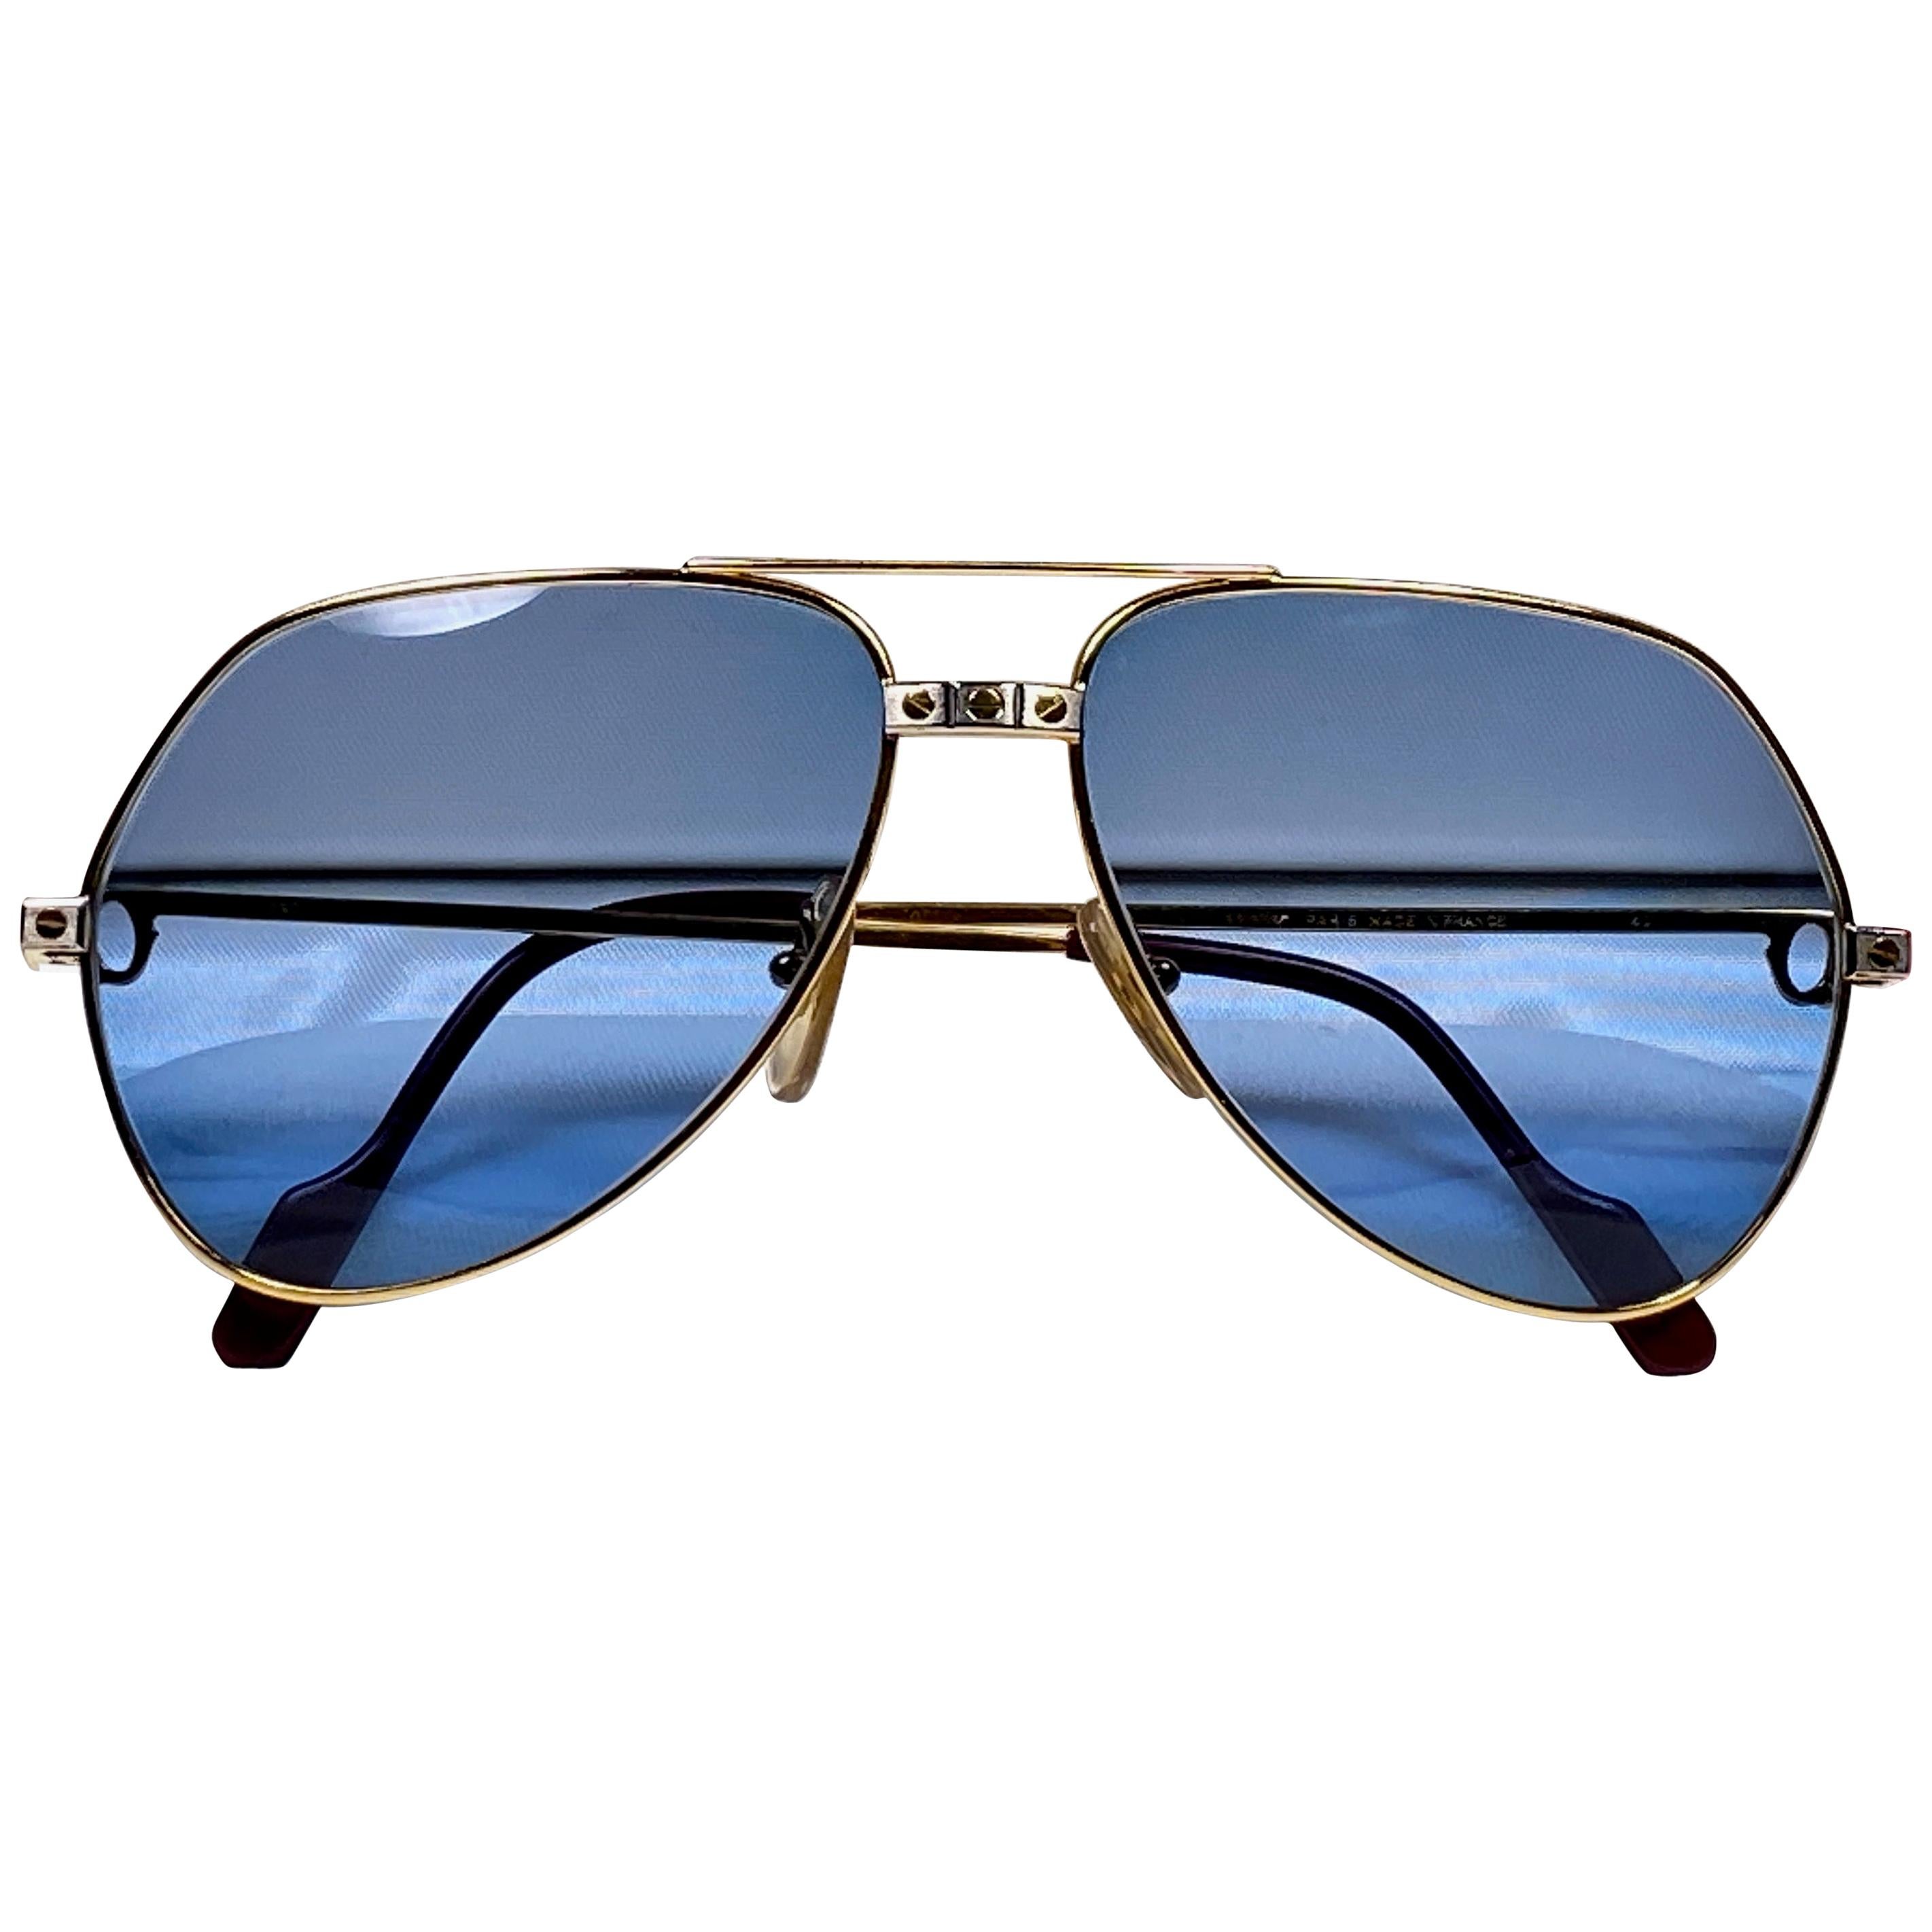 New from 1983!!! Cartier Aviator Santos Sunglasses with blue (uv protection) Lenses. Frame is with the famous screws on the front and sides in yellow and white gold. All hallmarks. Red enamel with Cartier gold signs on the ear paddles. Both arms